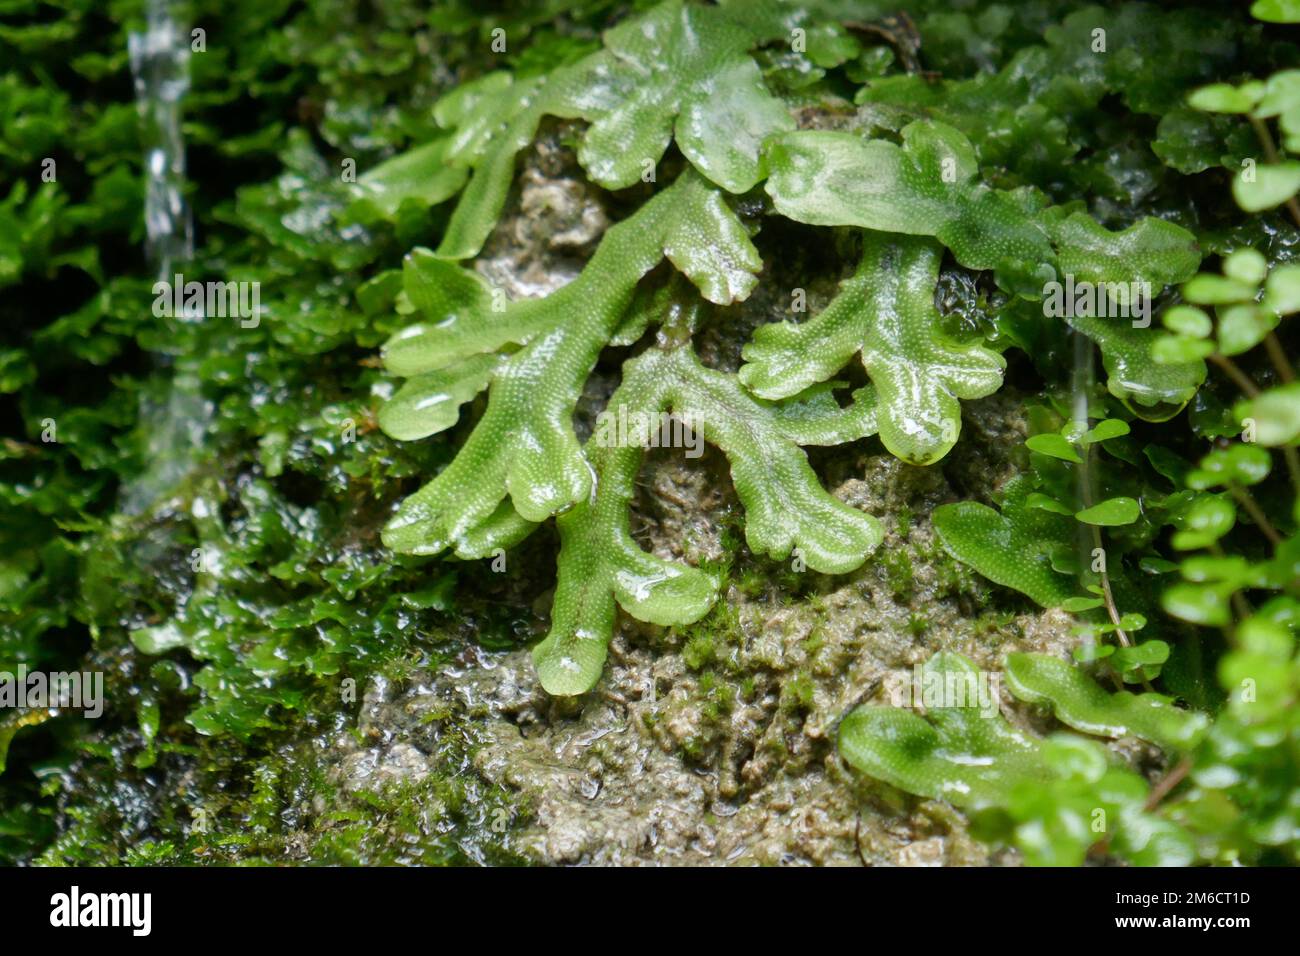 Liverwort beautiful primitive lush green plant with water on leaves Stock Photo